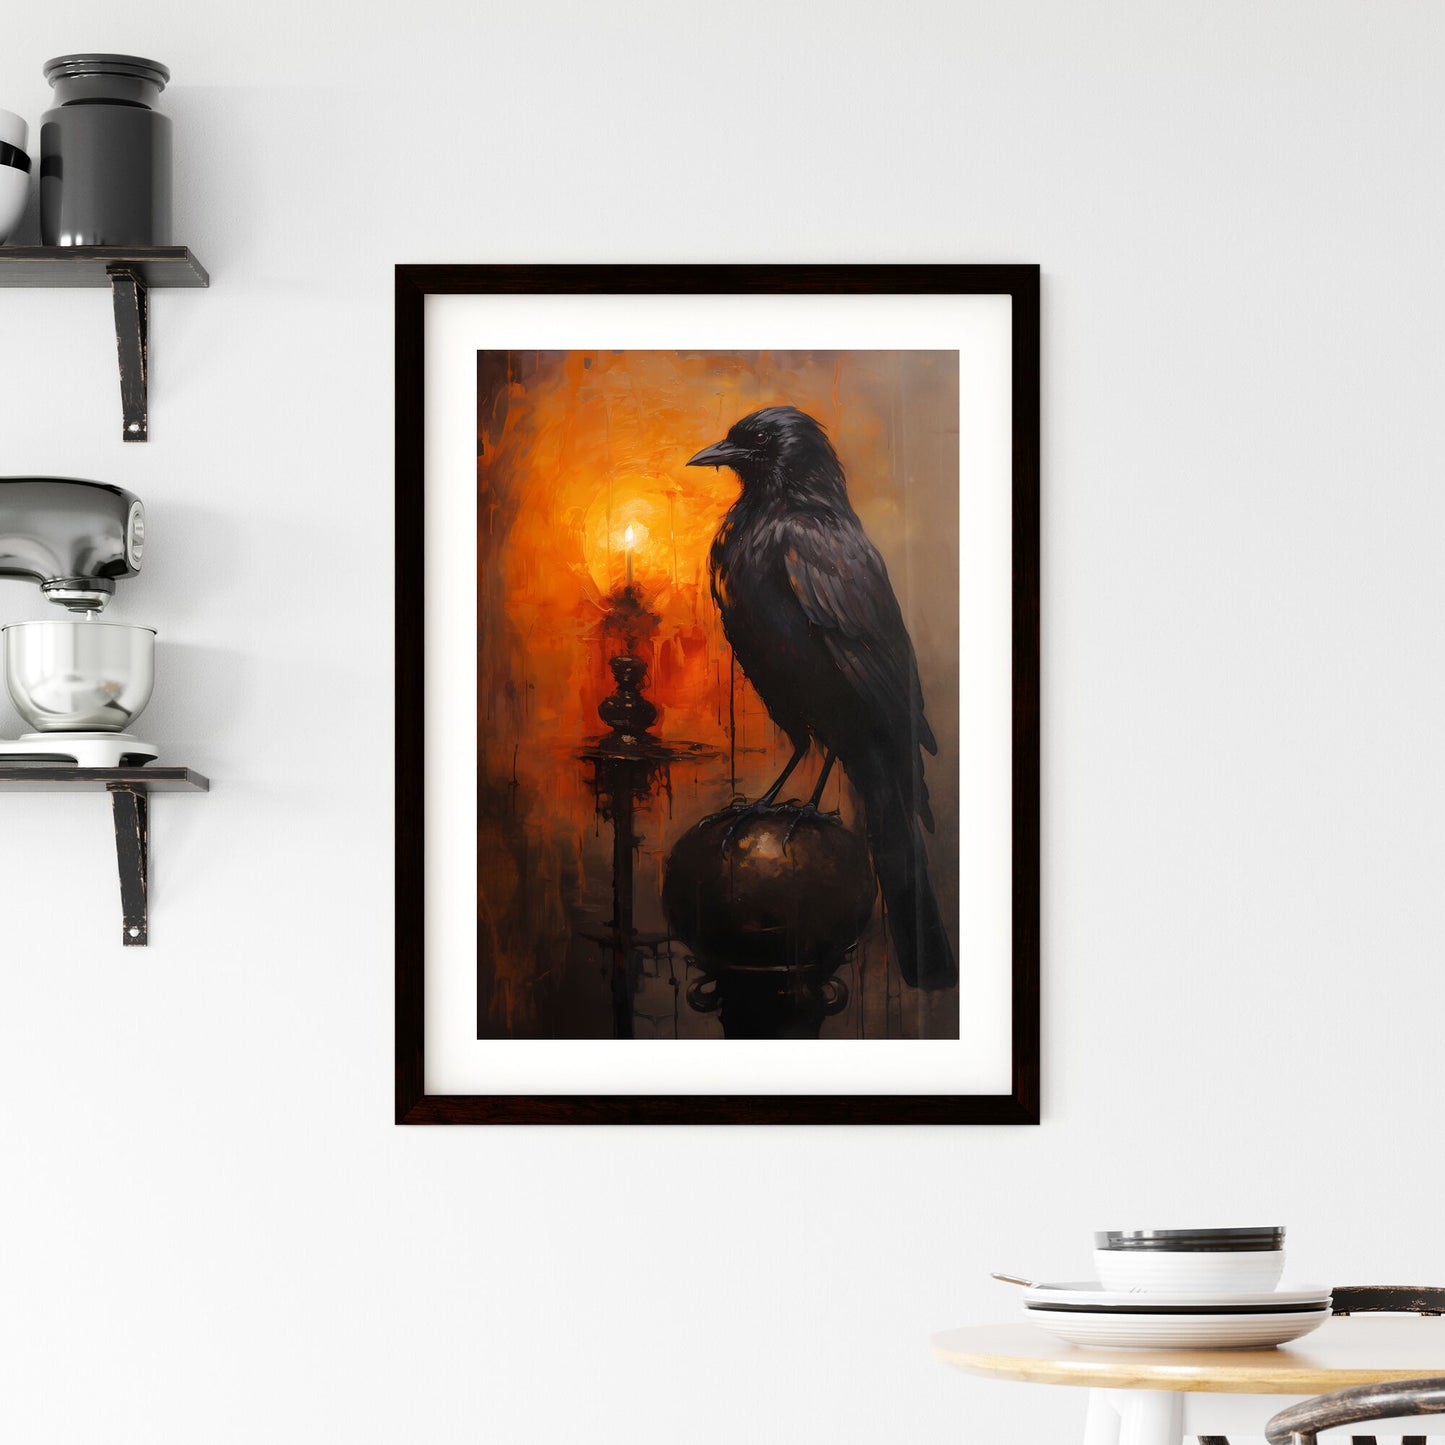 A Poster of A mysterious oil painting with a black crow - A Black Bird Sitting On A Round Object Default Title